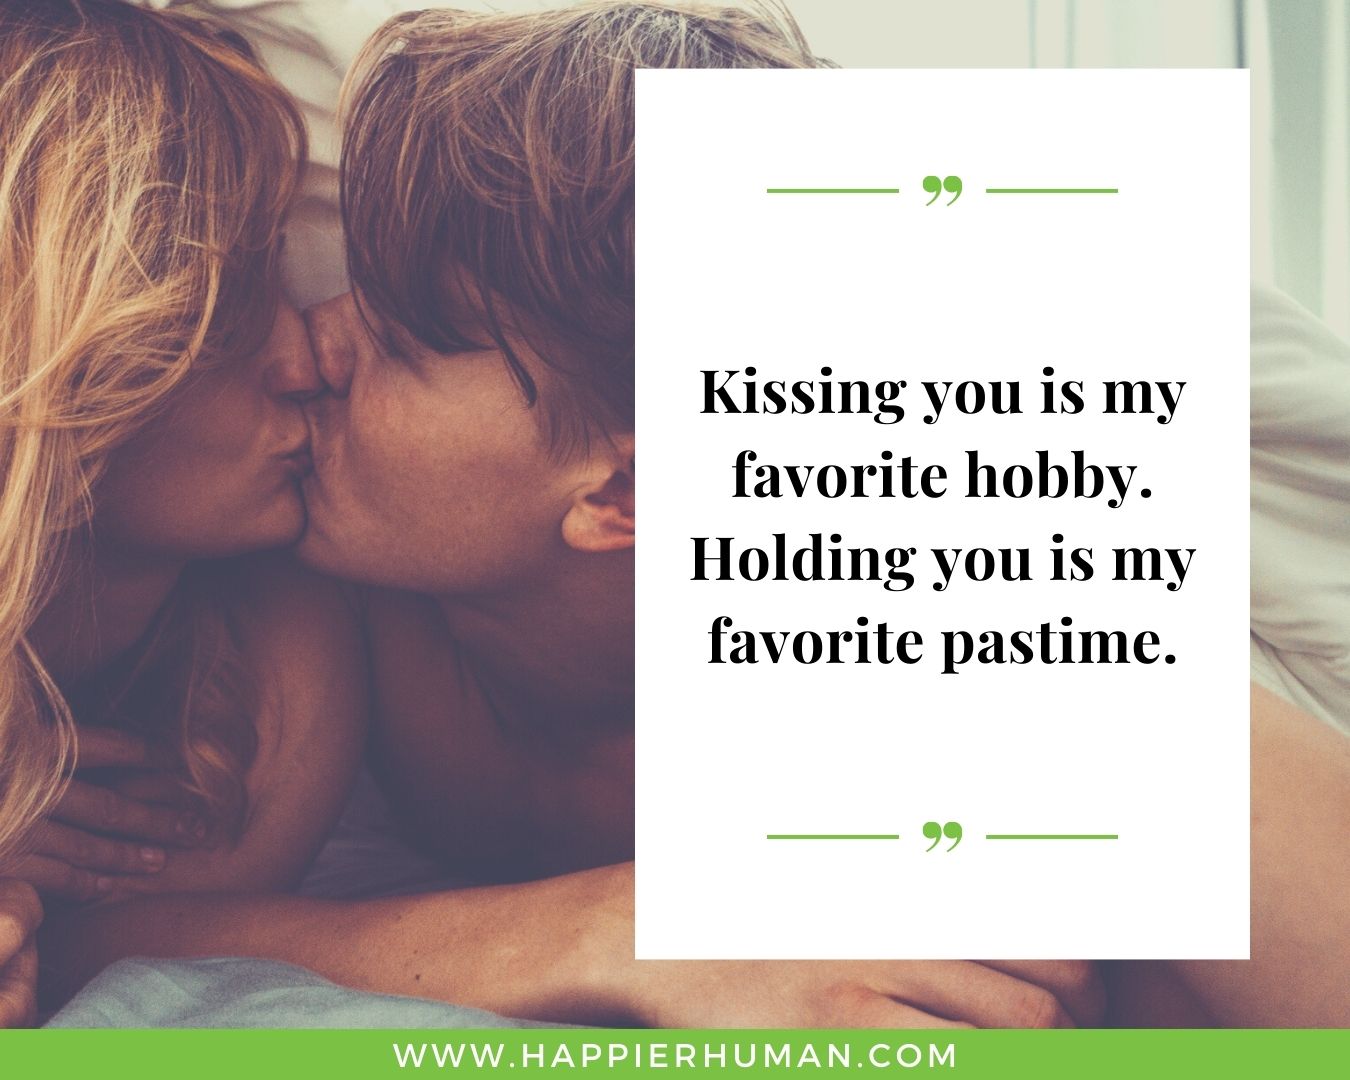 Sweet and Romantic Love Quotes for Her - “Kissing you is my favorite hobby. Holding you is my favorite pastime.”